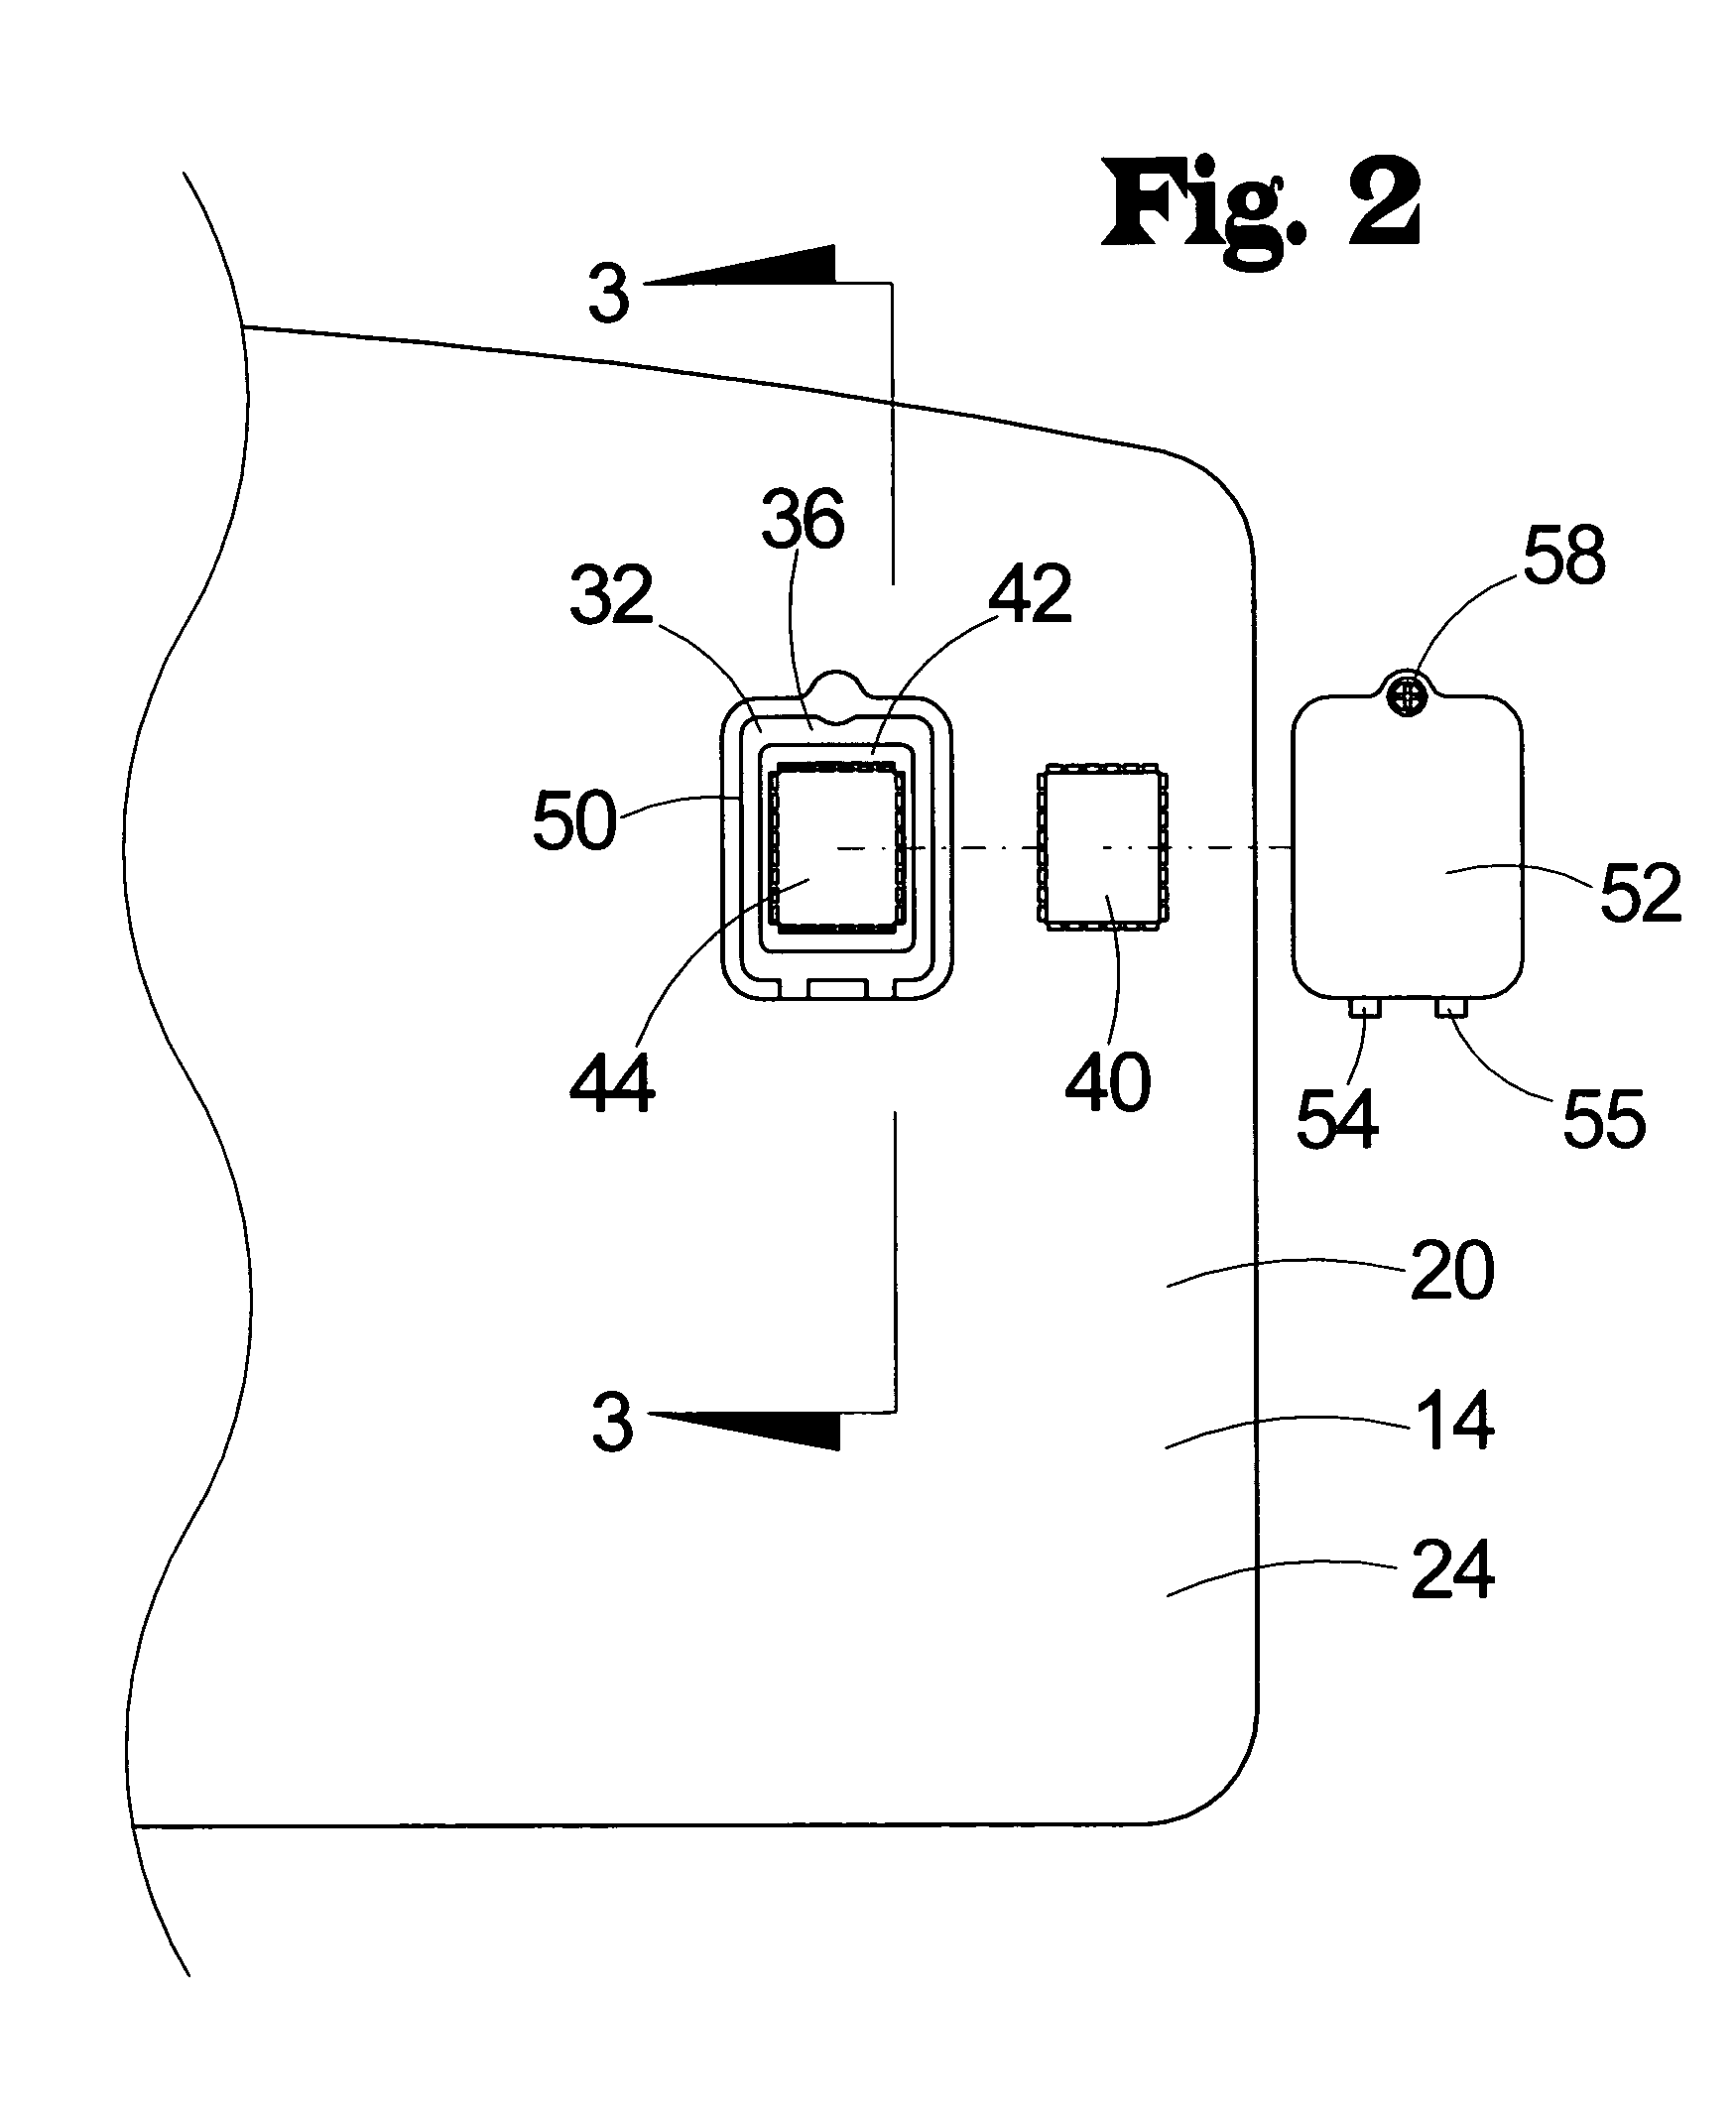 System for assembling computers to provide a favorable import classification